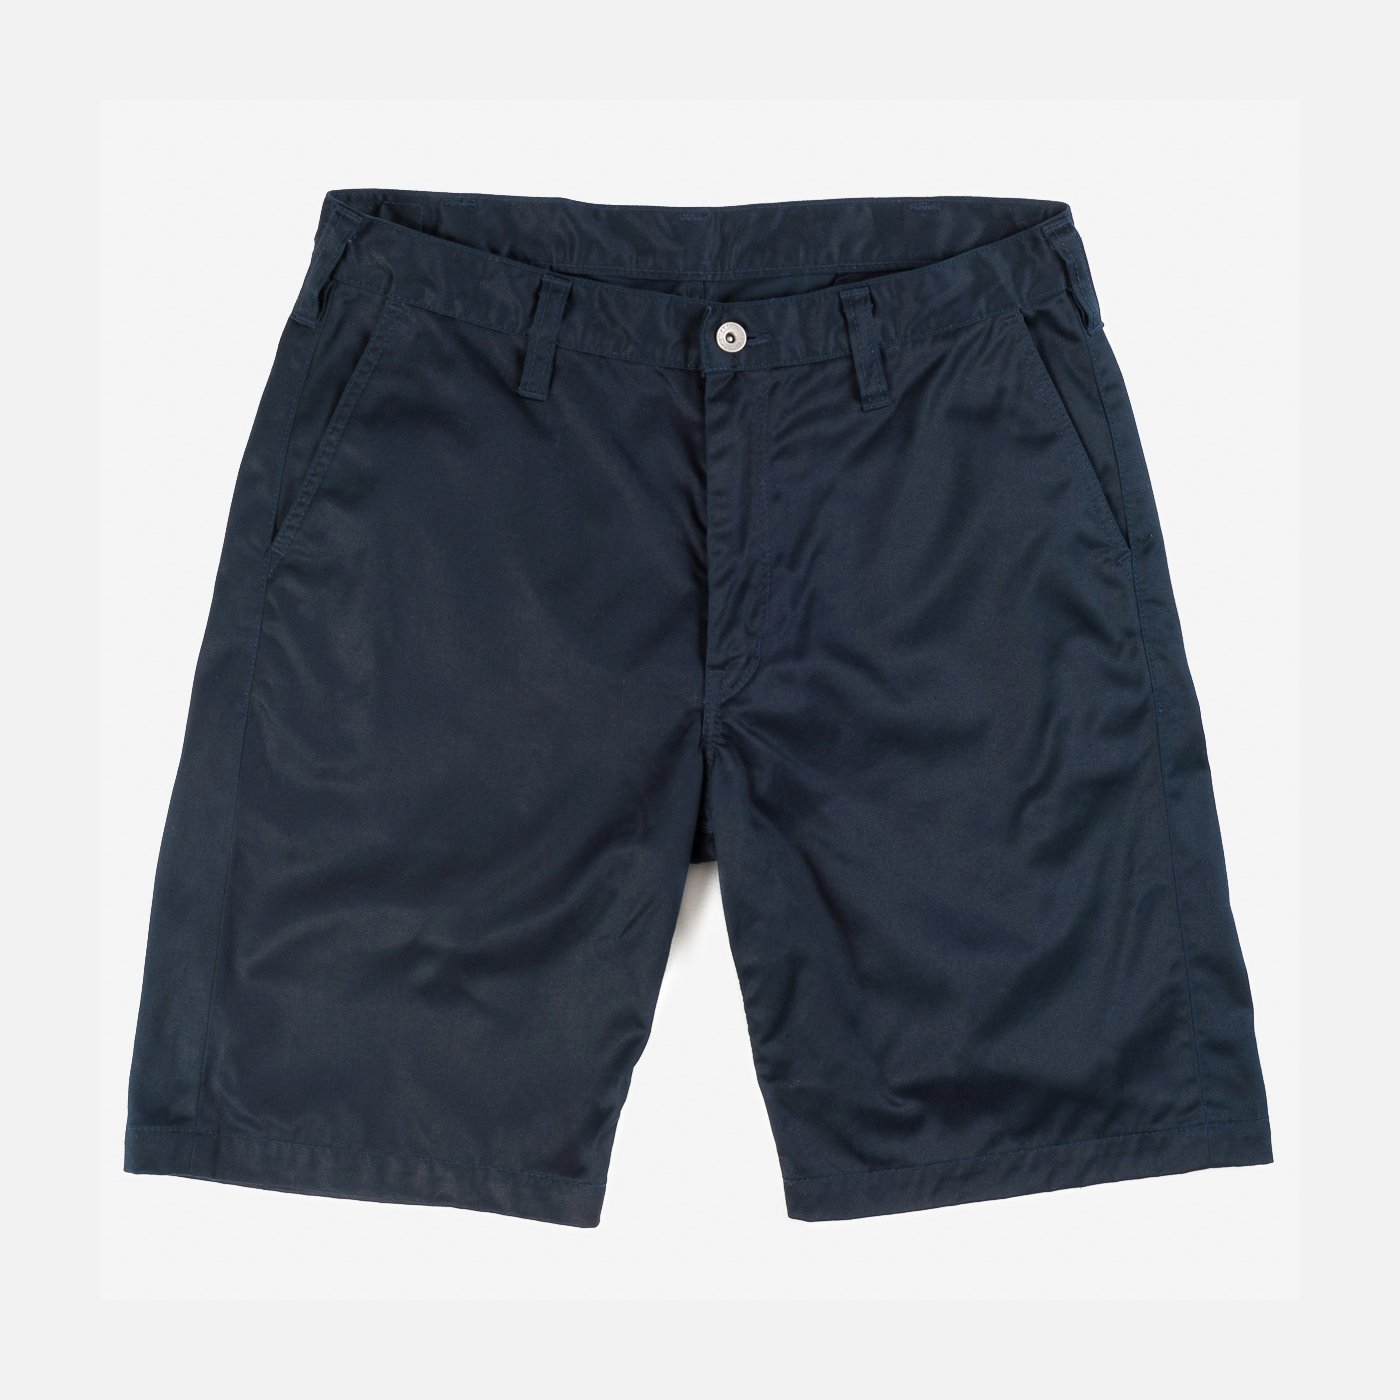 Iron Heart 11oz West Point Shorts in Navy